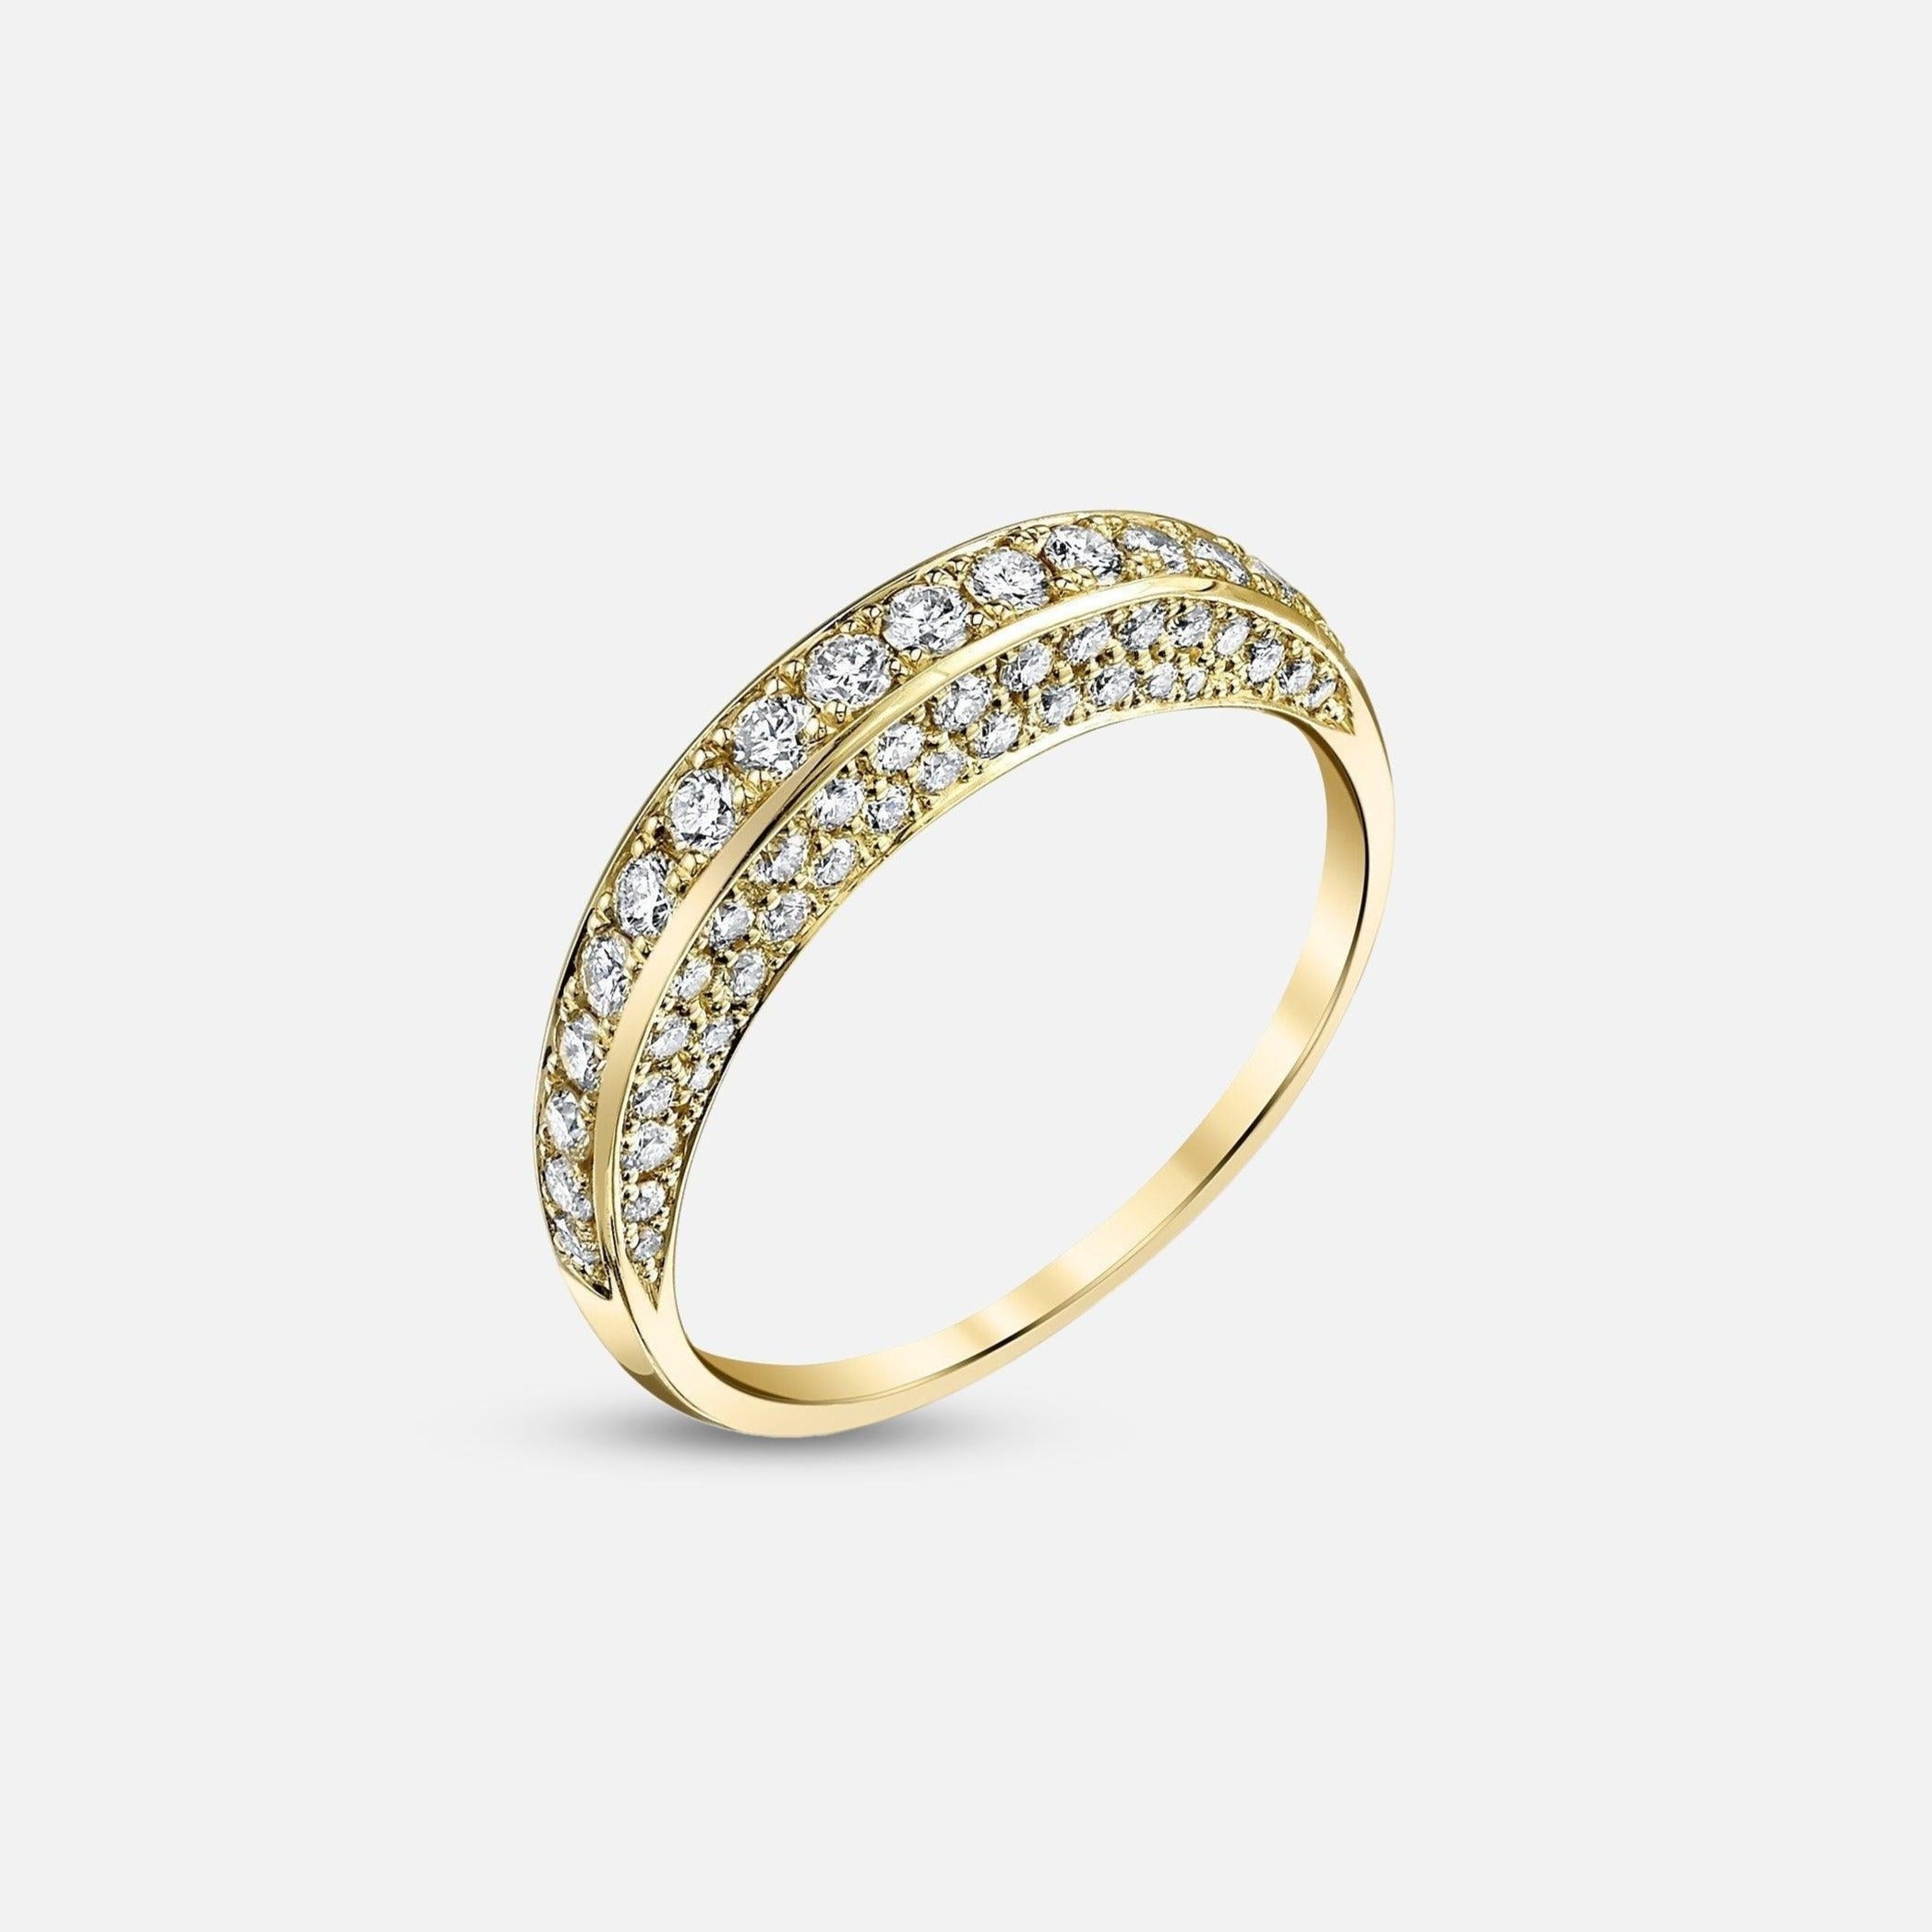 Arc Ring with Diamonds - Stacy Nolan - At Present